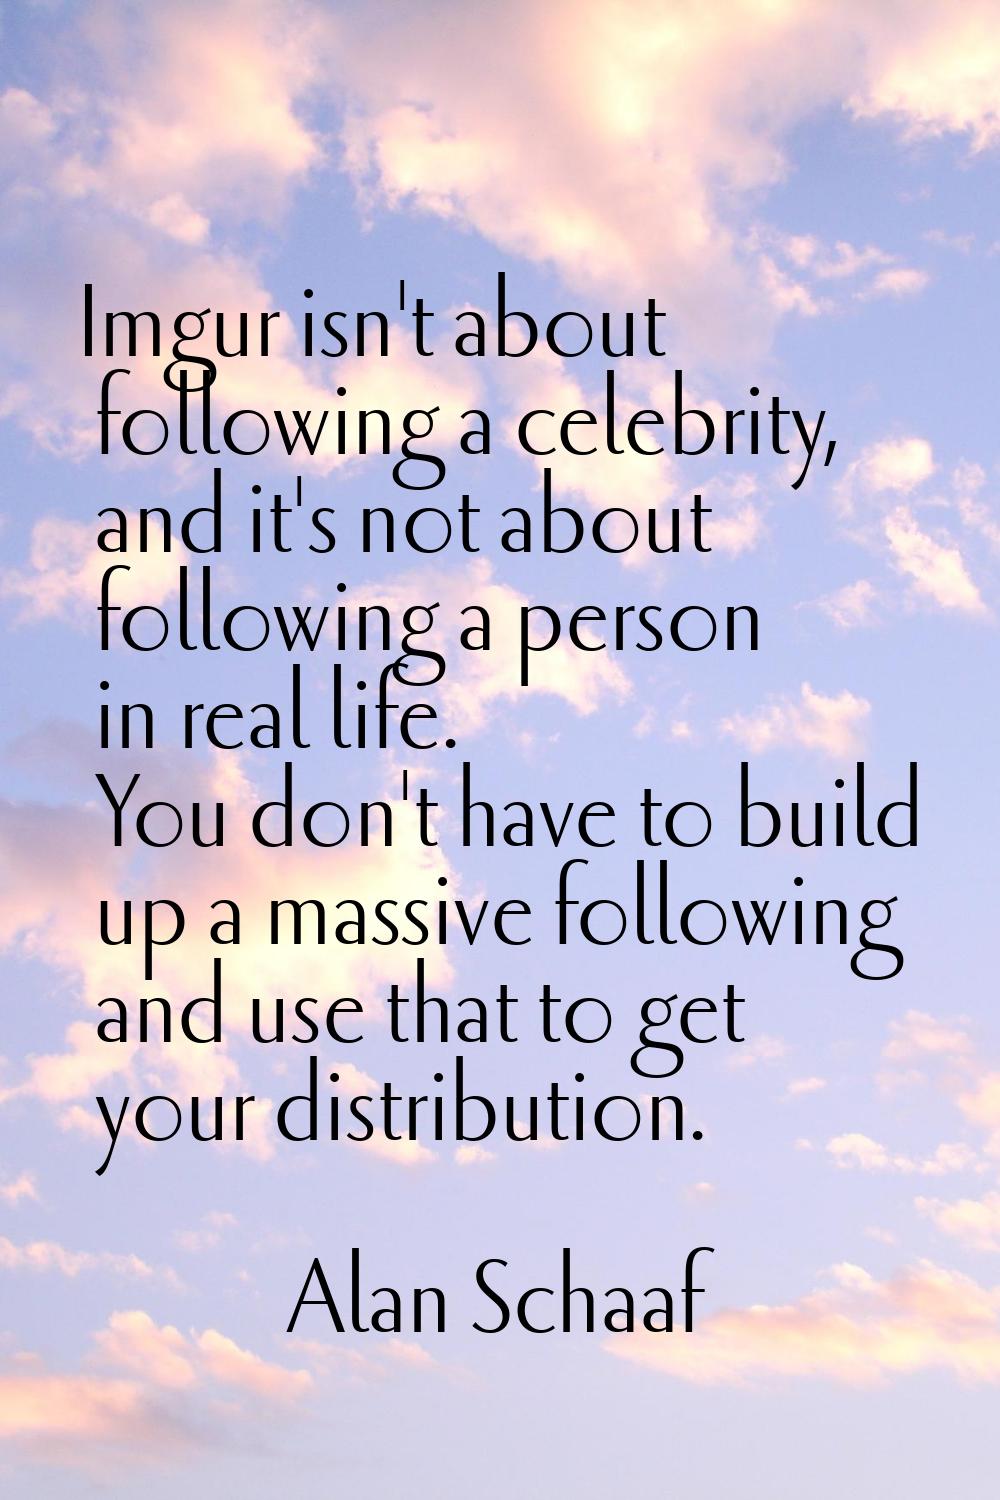 Imgur isn't about following a celebrity, and it's not about following a person in real life. You do